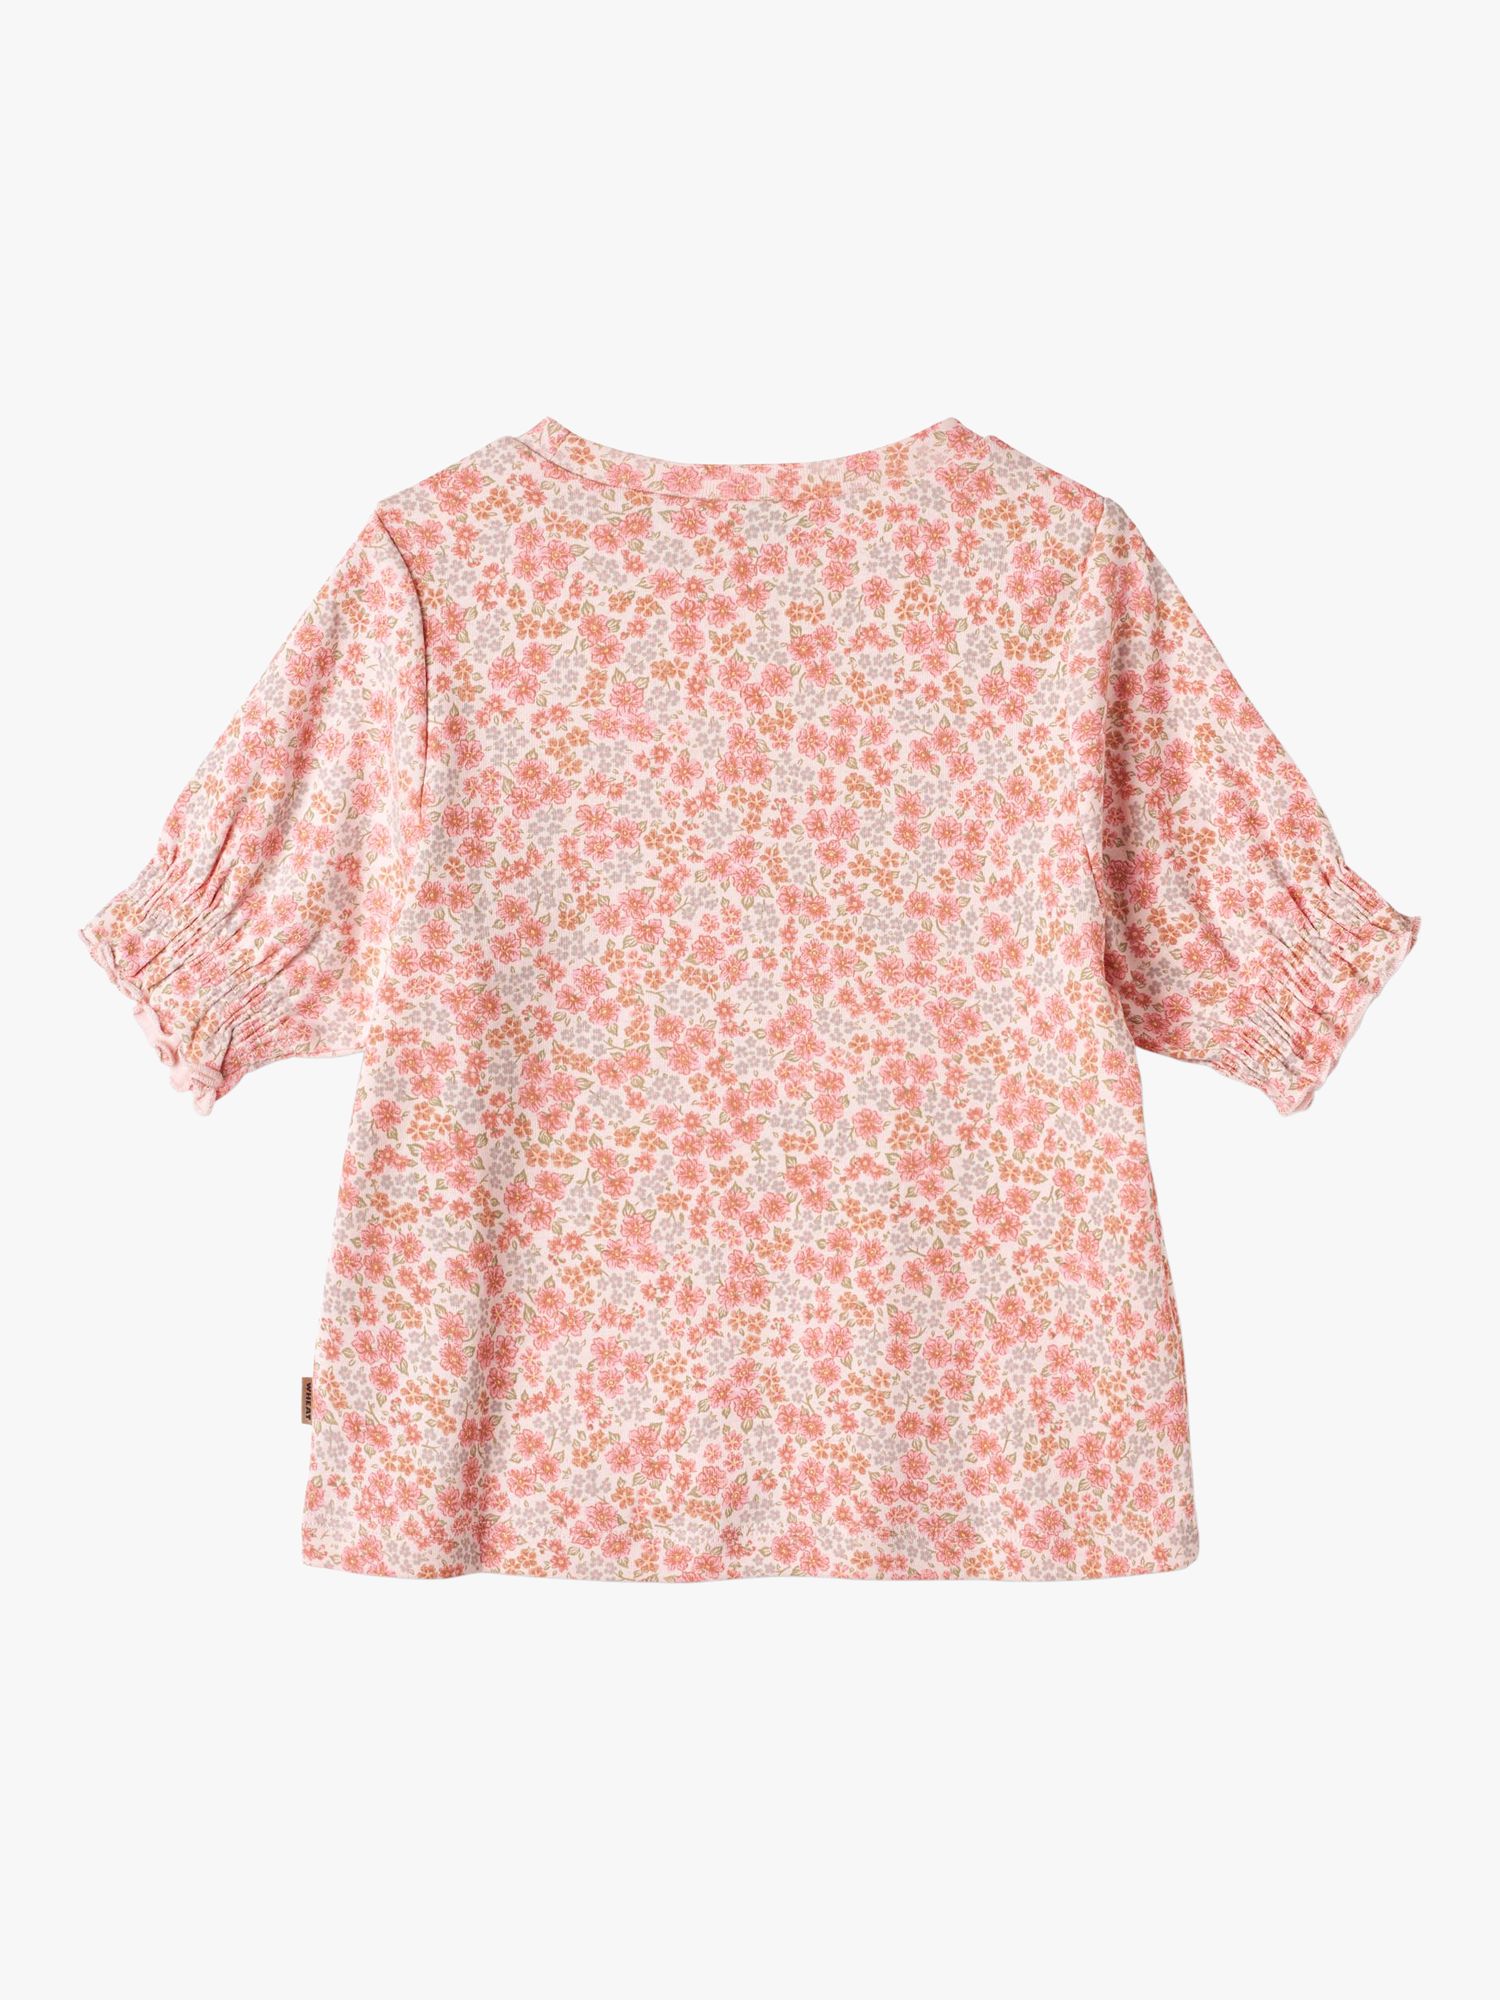 Buy WHEAT Kids' Norma Floral Print Top, Pink Online at johnlewis.com